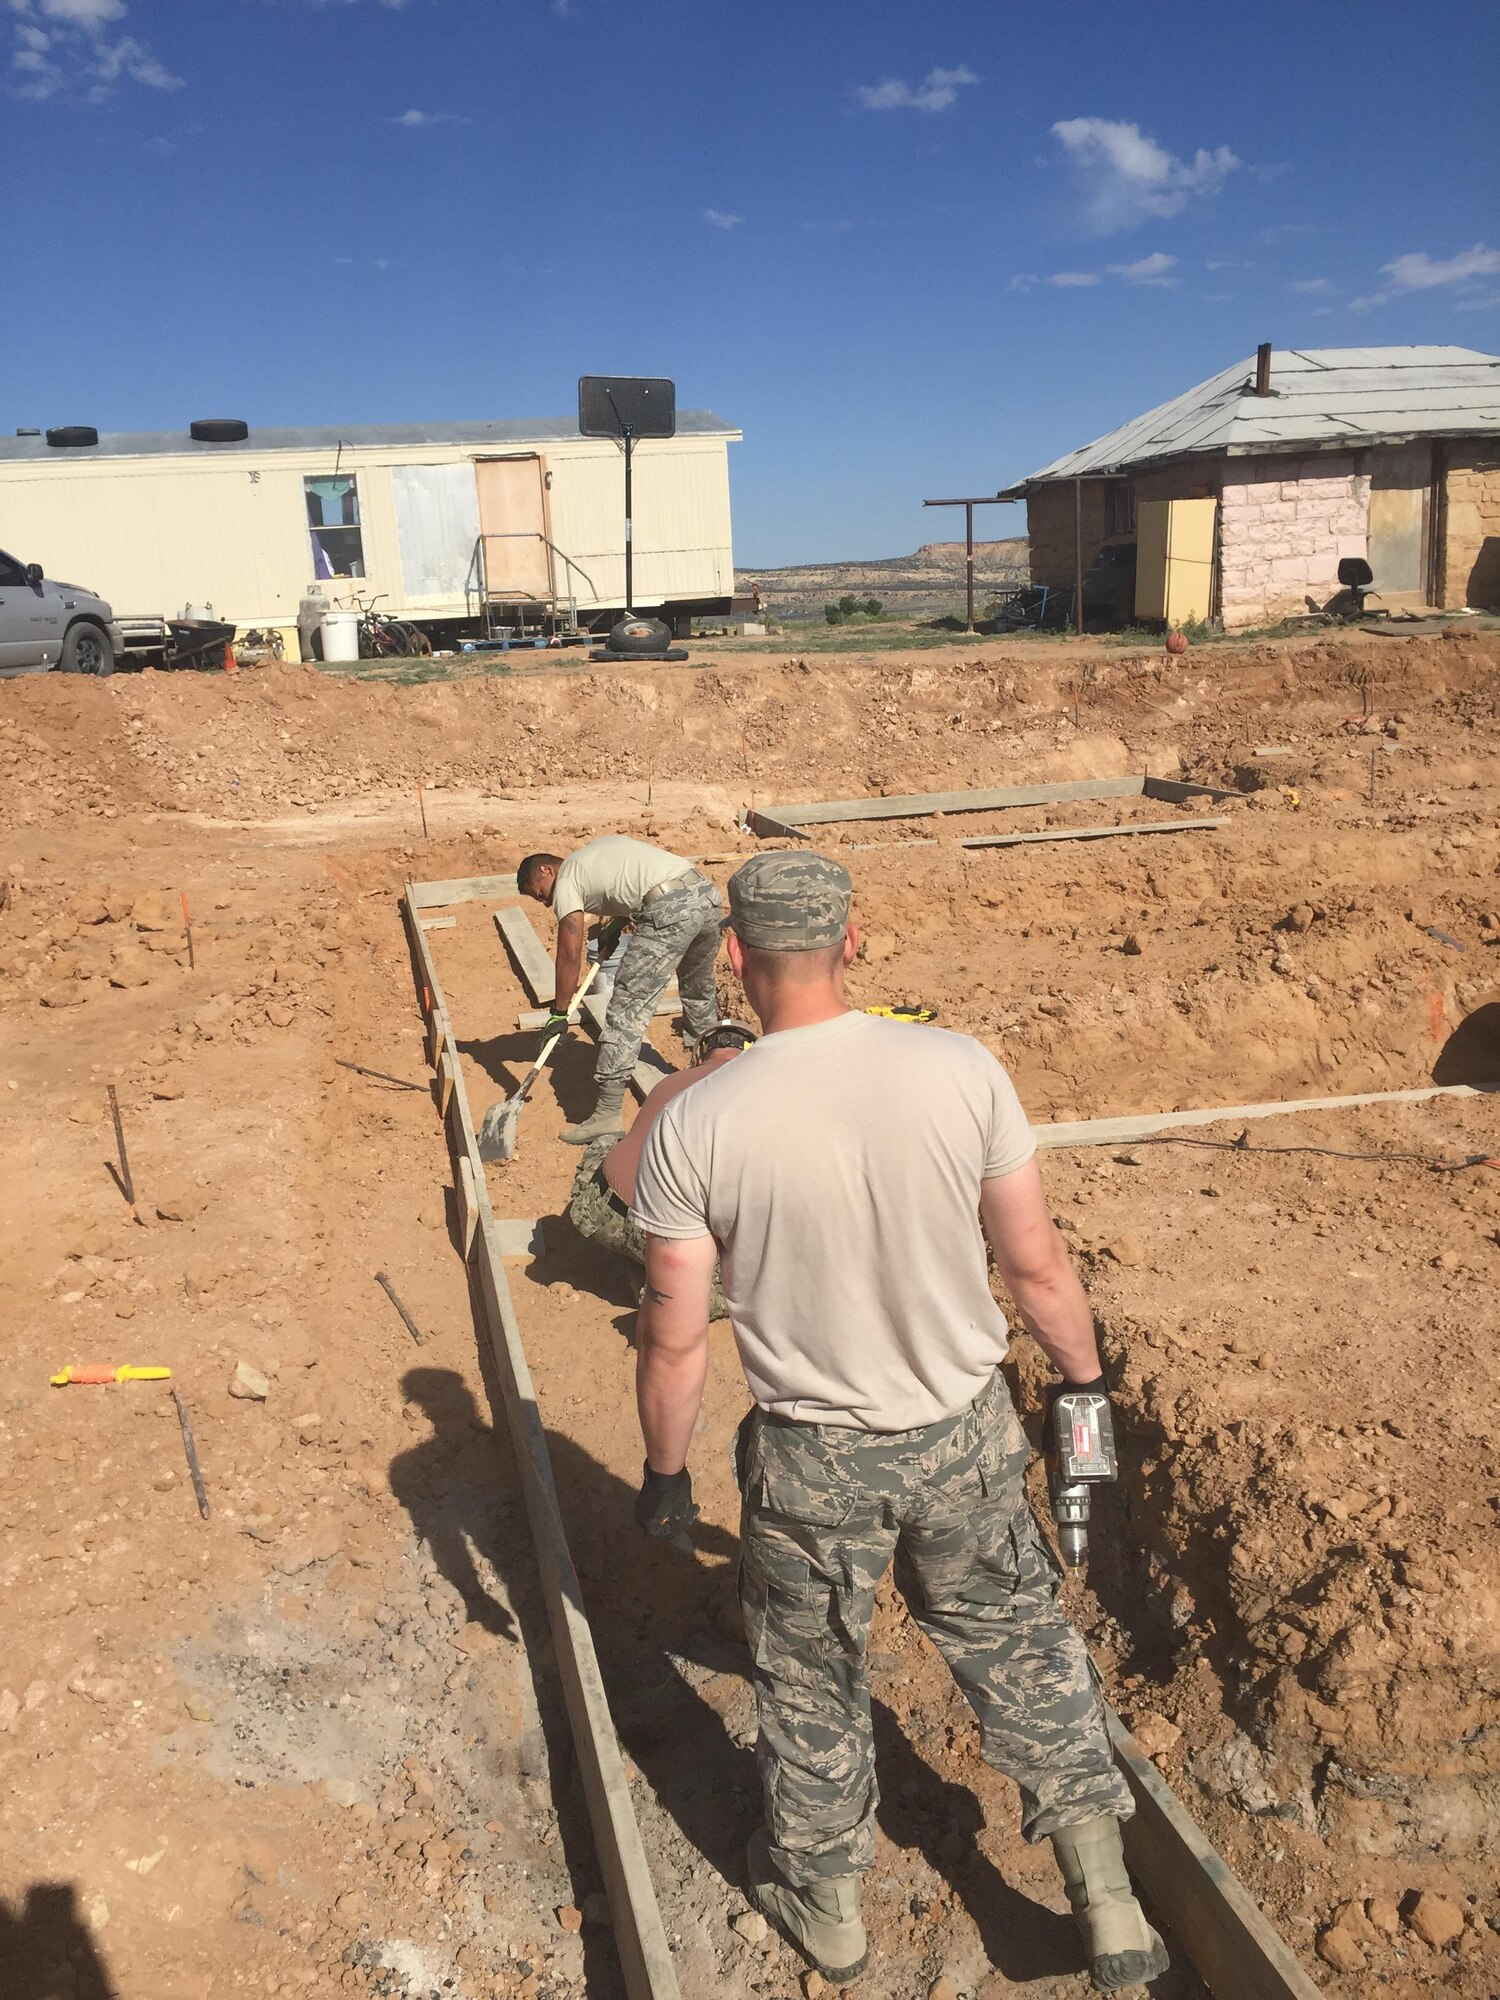 Air Force Reservists from the 302nd Civil Engineer Squadron set up forms to pour concrete for the foundation of a new home May 31, 2016 in Gallup, N.M. As part of the Operation Footprint partnership, twenty-four Reservists from the 302nd CES contributed to completing five new homes for the Navajo Nation while performing Innovative Readiness Training and honing skills for wartime missions. (Courtesy photo)